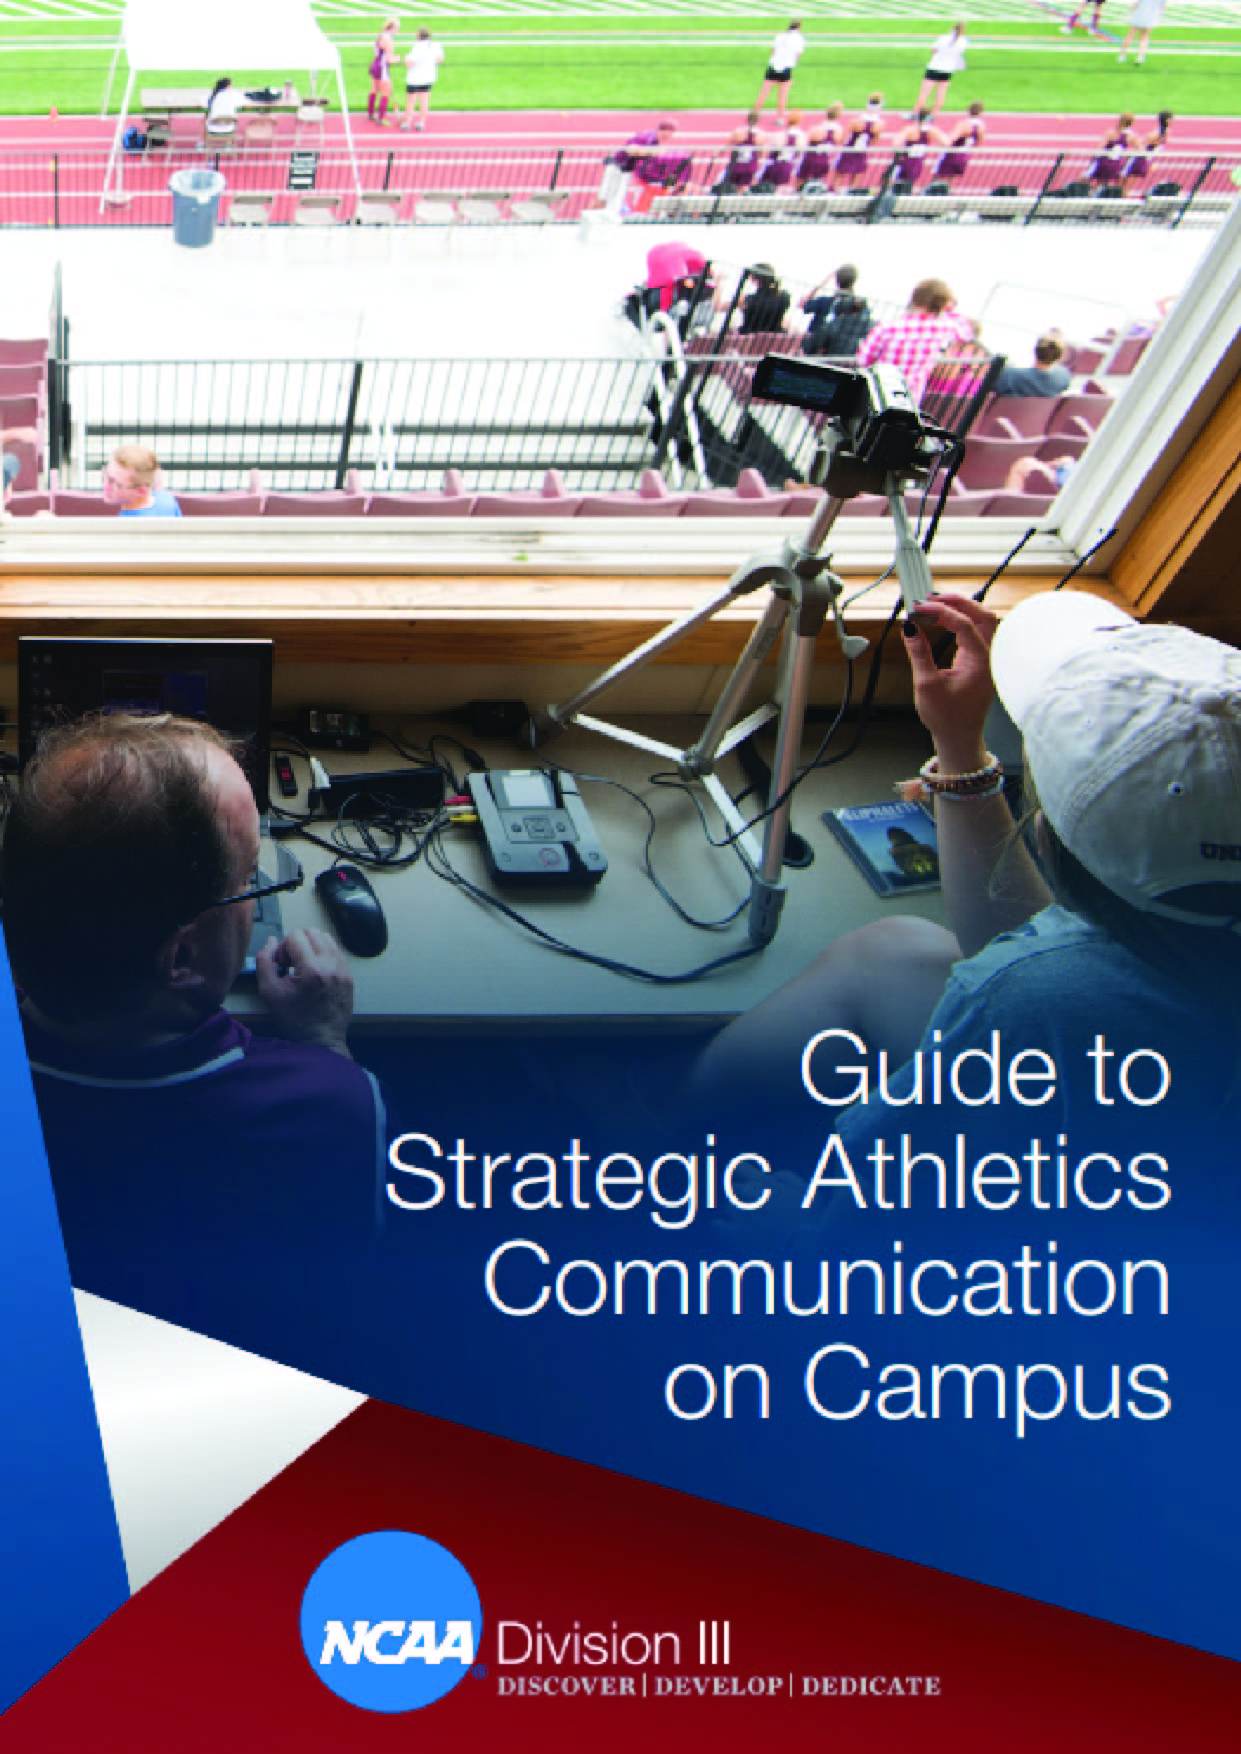 Guide to Strategic Athletics Communication on Campus